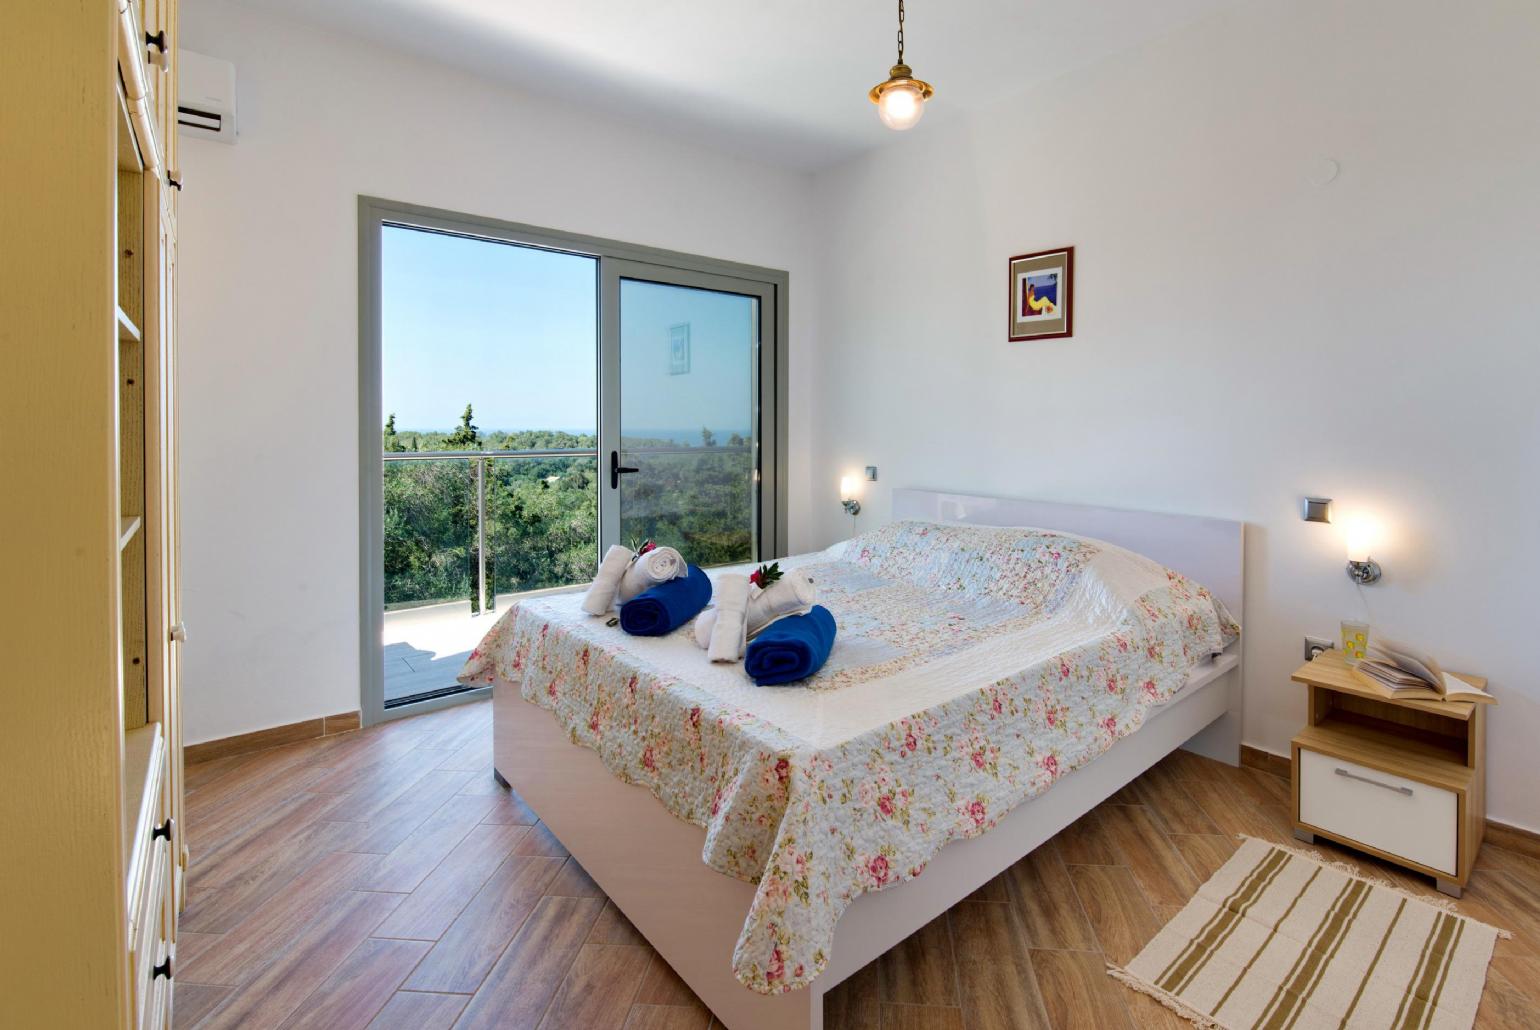 Double bedroom with terrace access and beautiful view